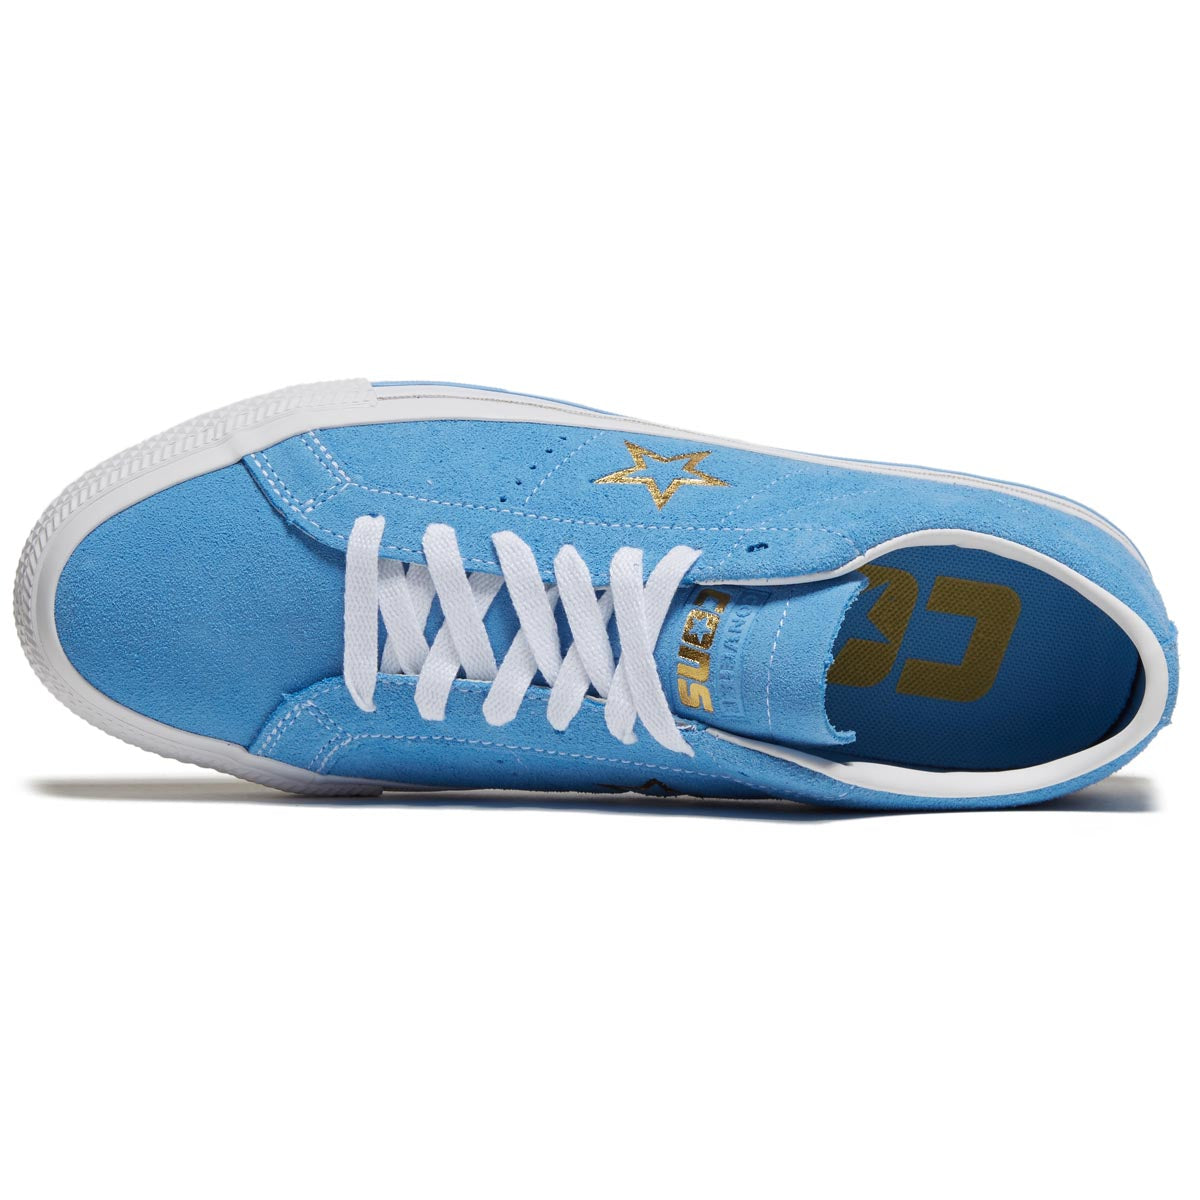 Converse One Star Pro Suede Ox Shoes - Light Blue/White/Gold image 3